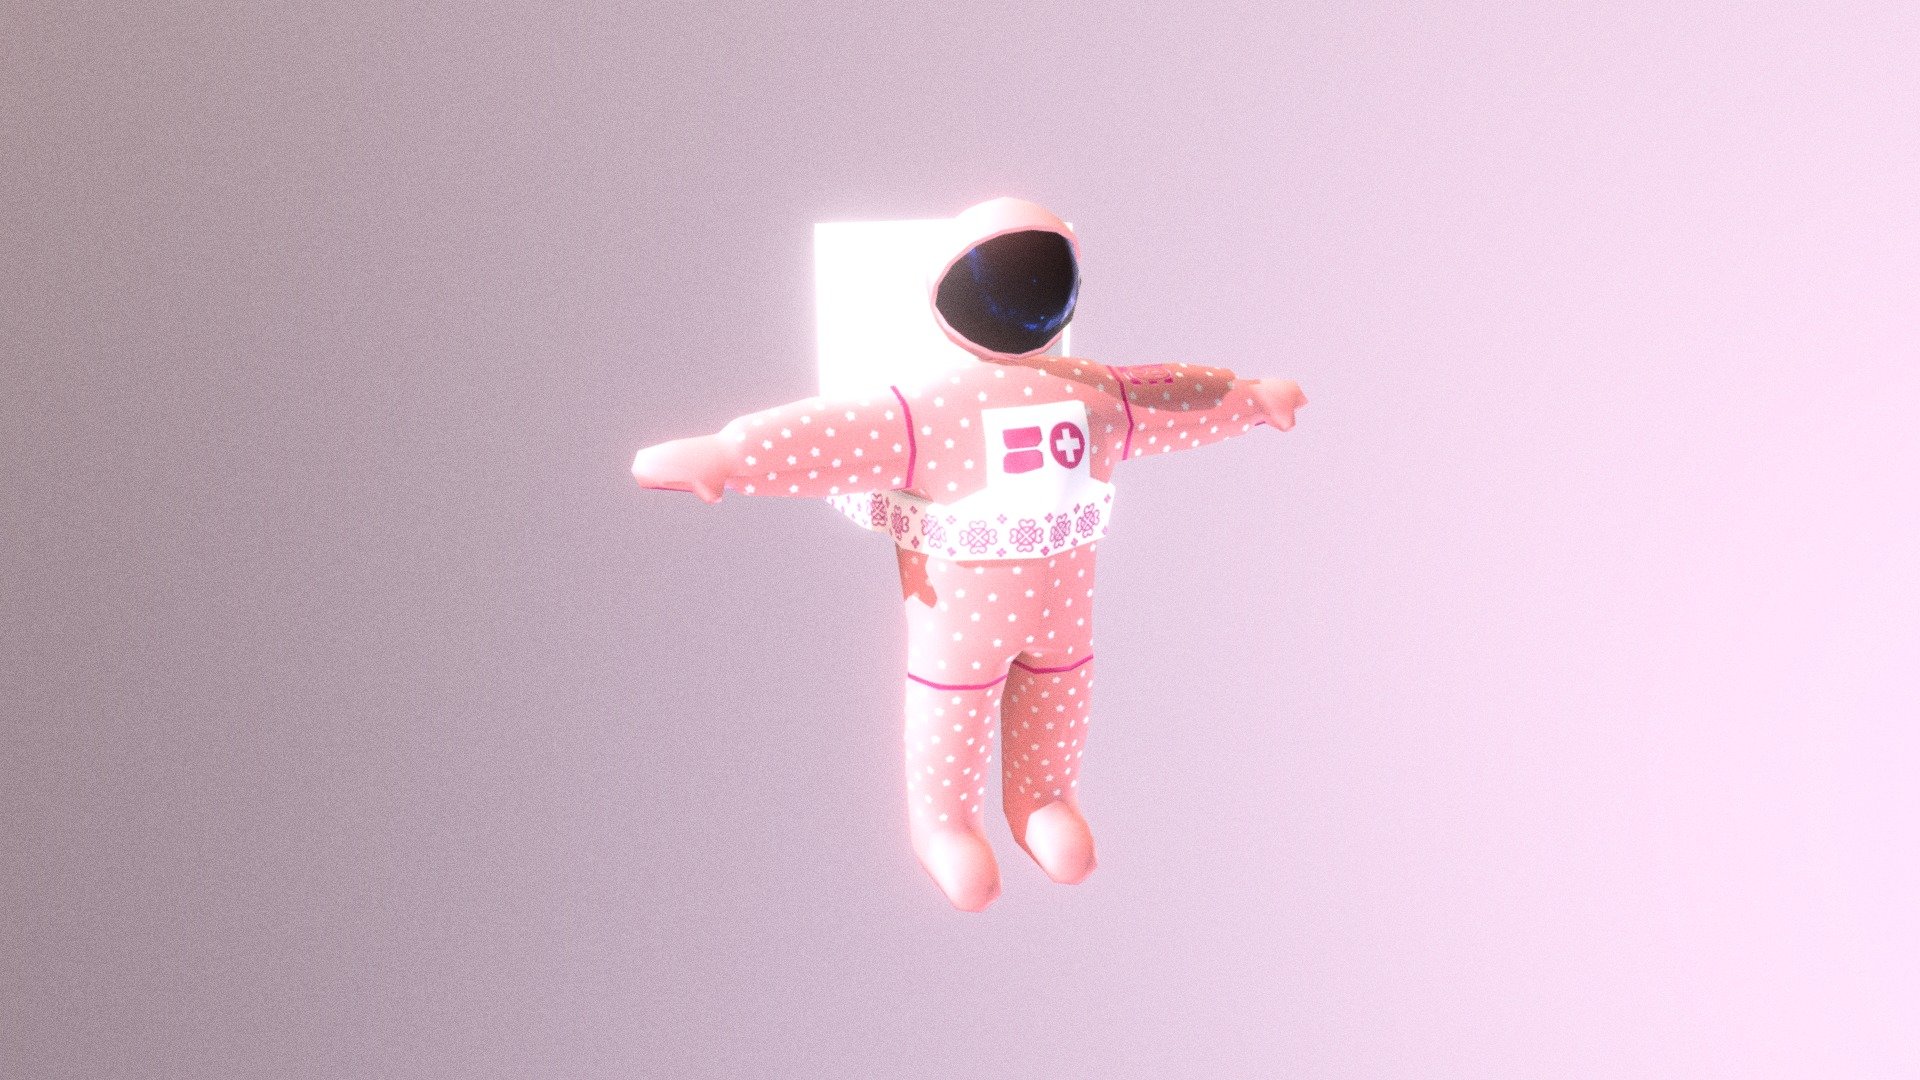 I just wanted a space suit that looked like Hello Kitty. Not her specifically, just wanted that Pockey Pink. Mmh strawberry 3d model